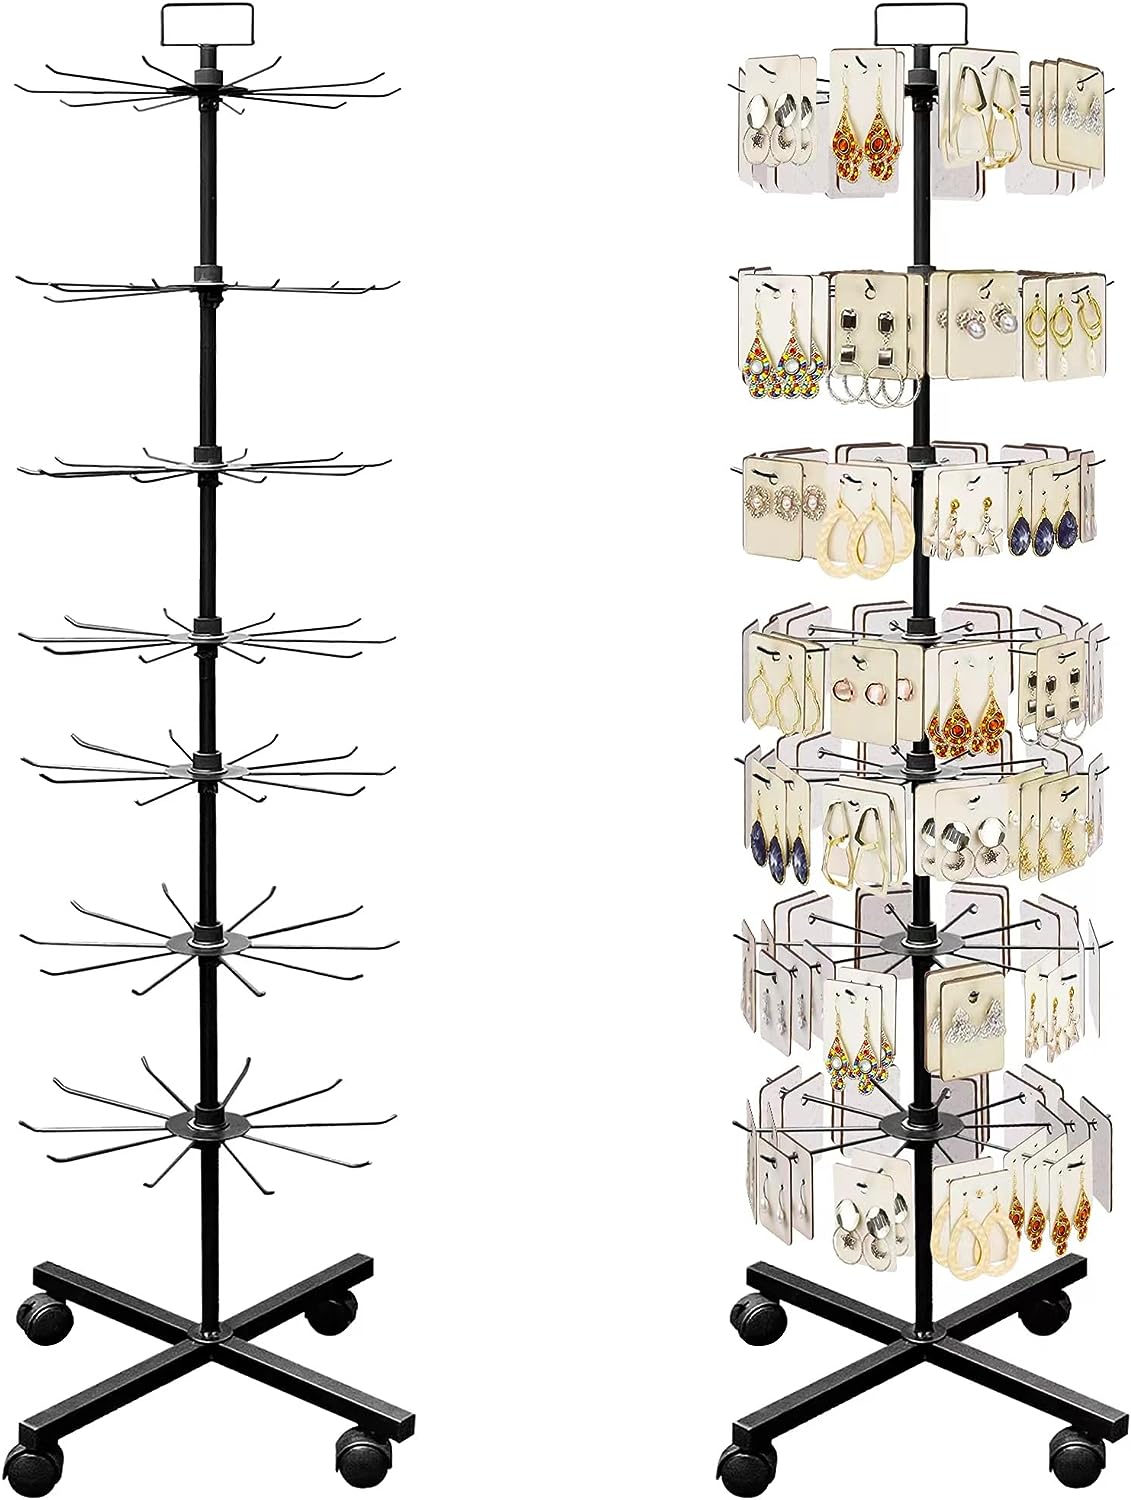 IPEXI Retail Display Stand 7 Tier for Store Spinner Display